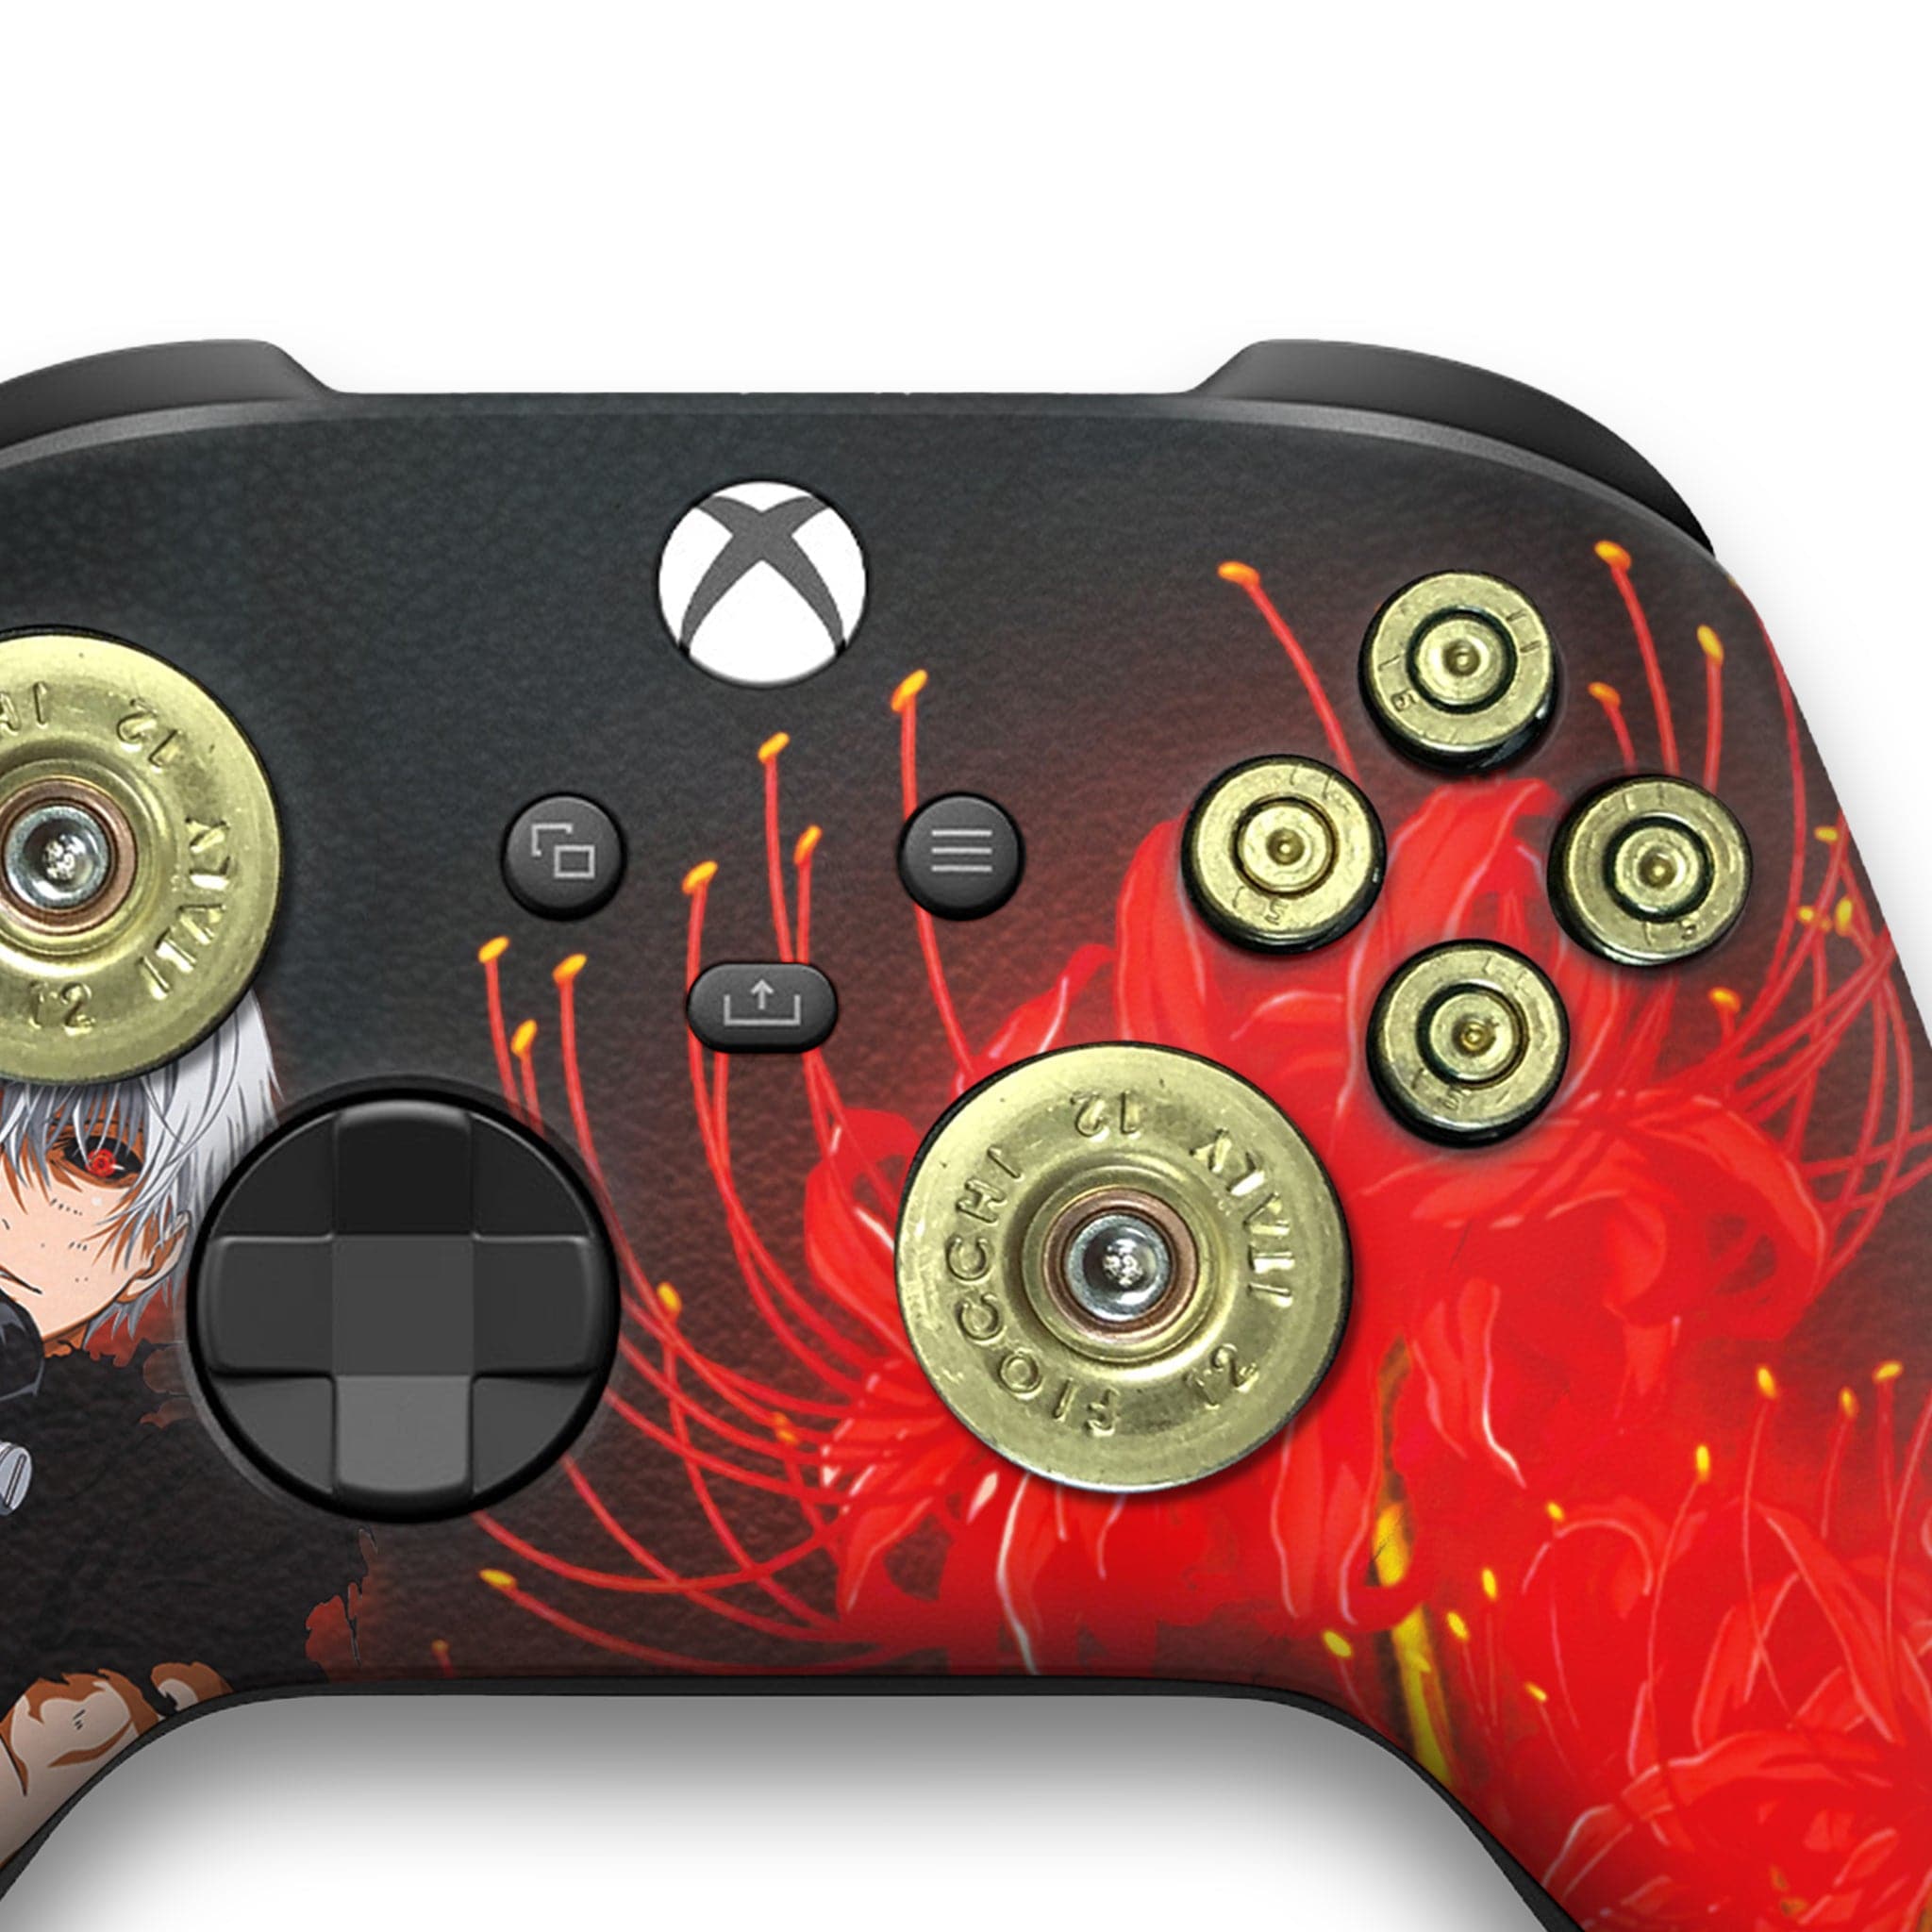 TOKYO GHOUL  inspired x box series x controller with bullet buttons